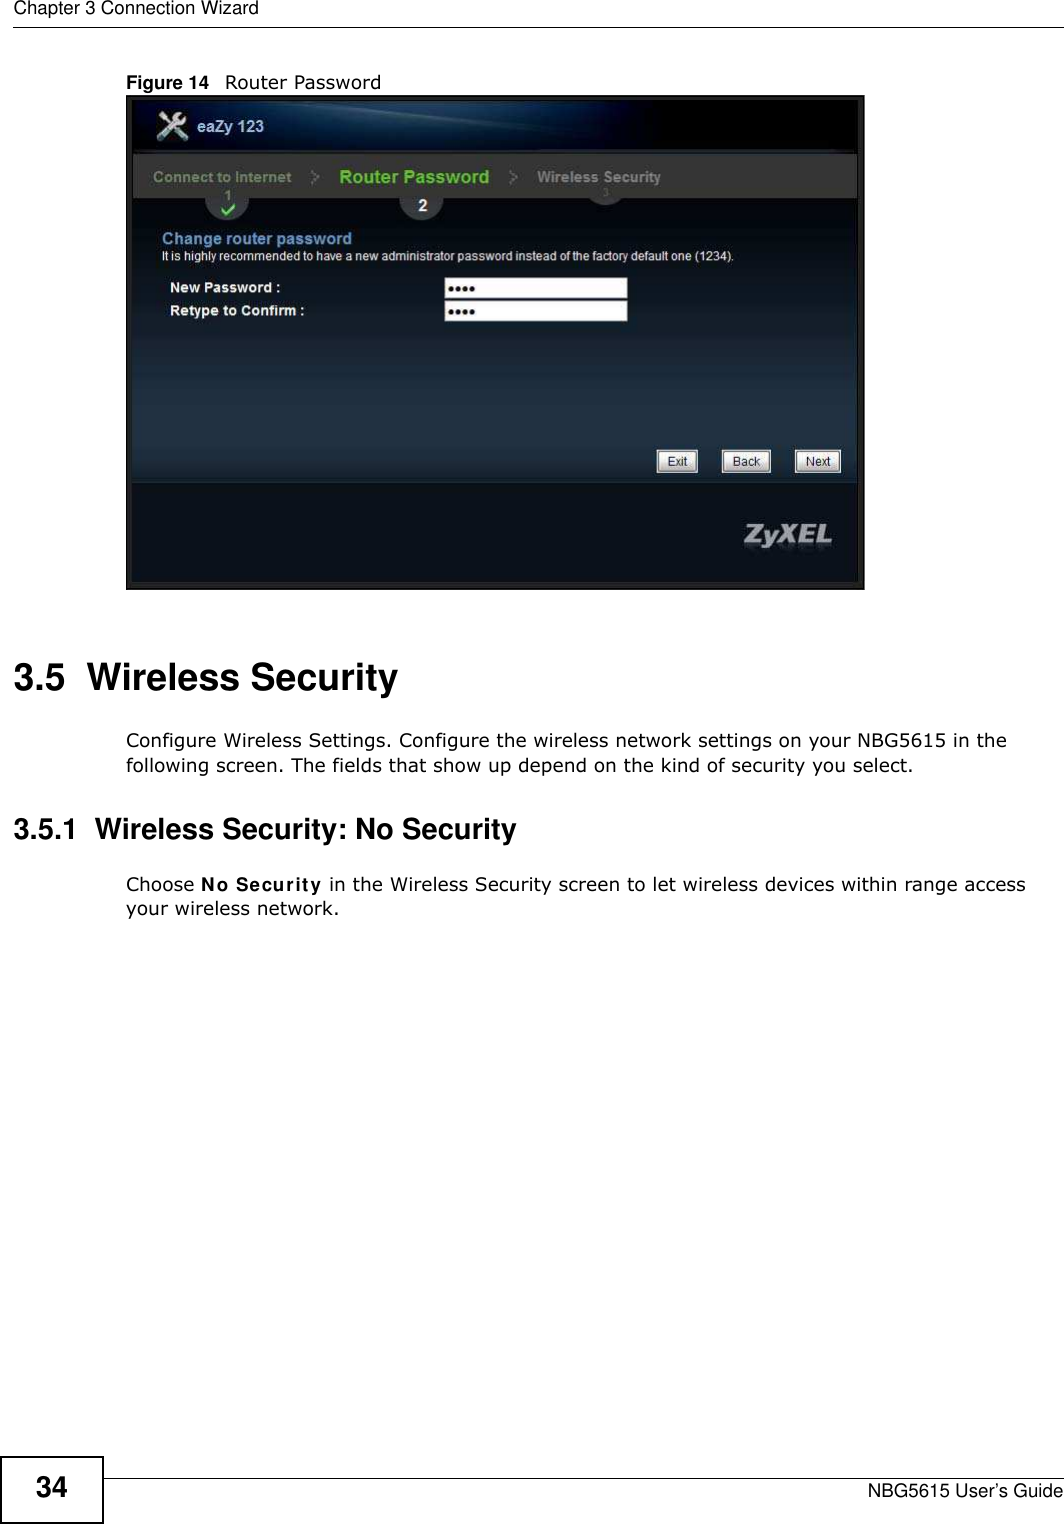 Chapter 3 Connection WizardNBG5615 User’s Guide34Figure 14   Router Password 3.5  Wireless SecurityConfigure Wireless Settings. Configure the wireless network settings on your NBG5615 in the following screen. The fields that show up depend on the kind of security you select.3.5.1  Wireless Security: No SecurityChoose No Security in the Wireless Security screen to let wireless devices within range access your wireless network.